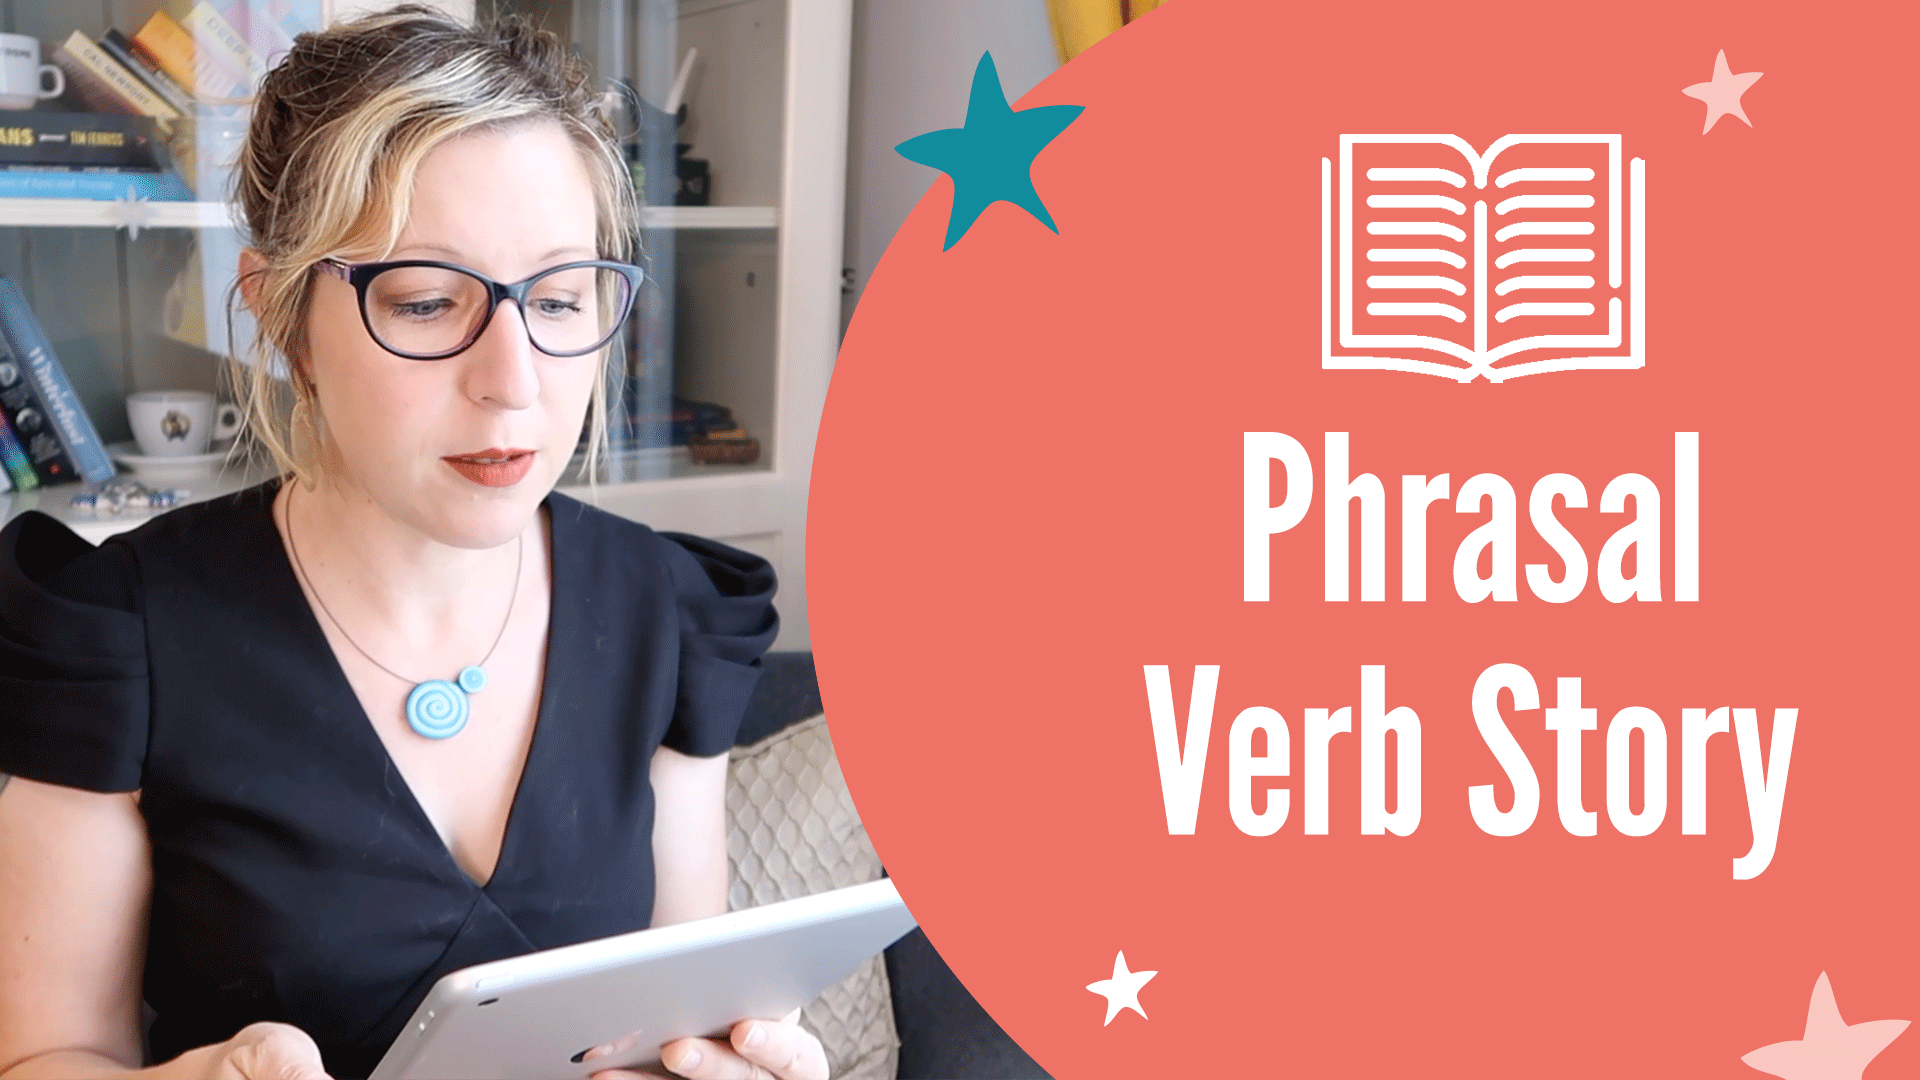 7 Phrasal Verbs for Business English